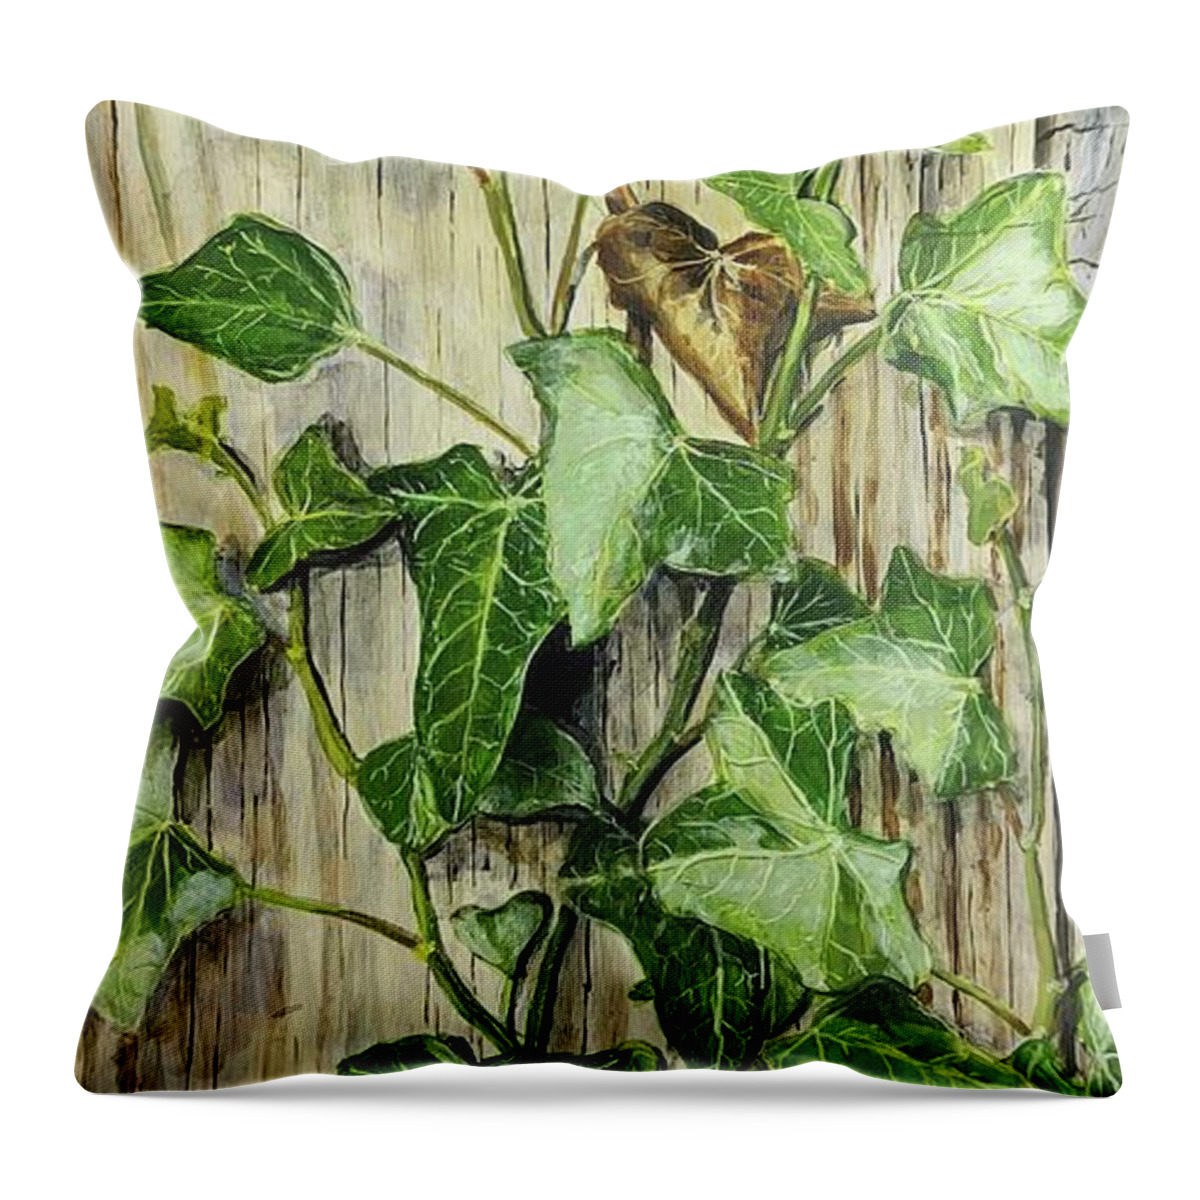 Ivy Throw Pillow featuring the painting The Fallen Soldier by William Brody